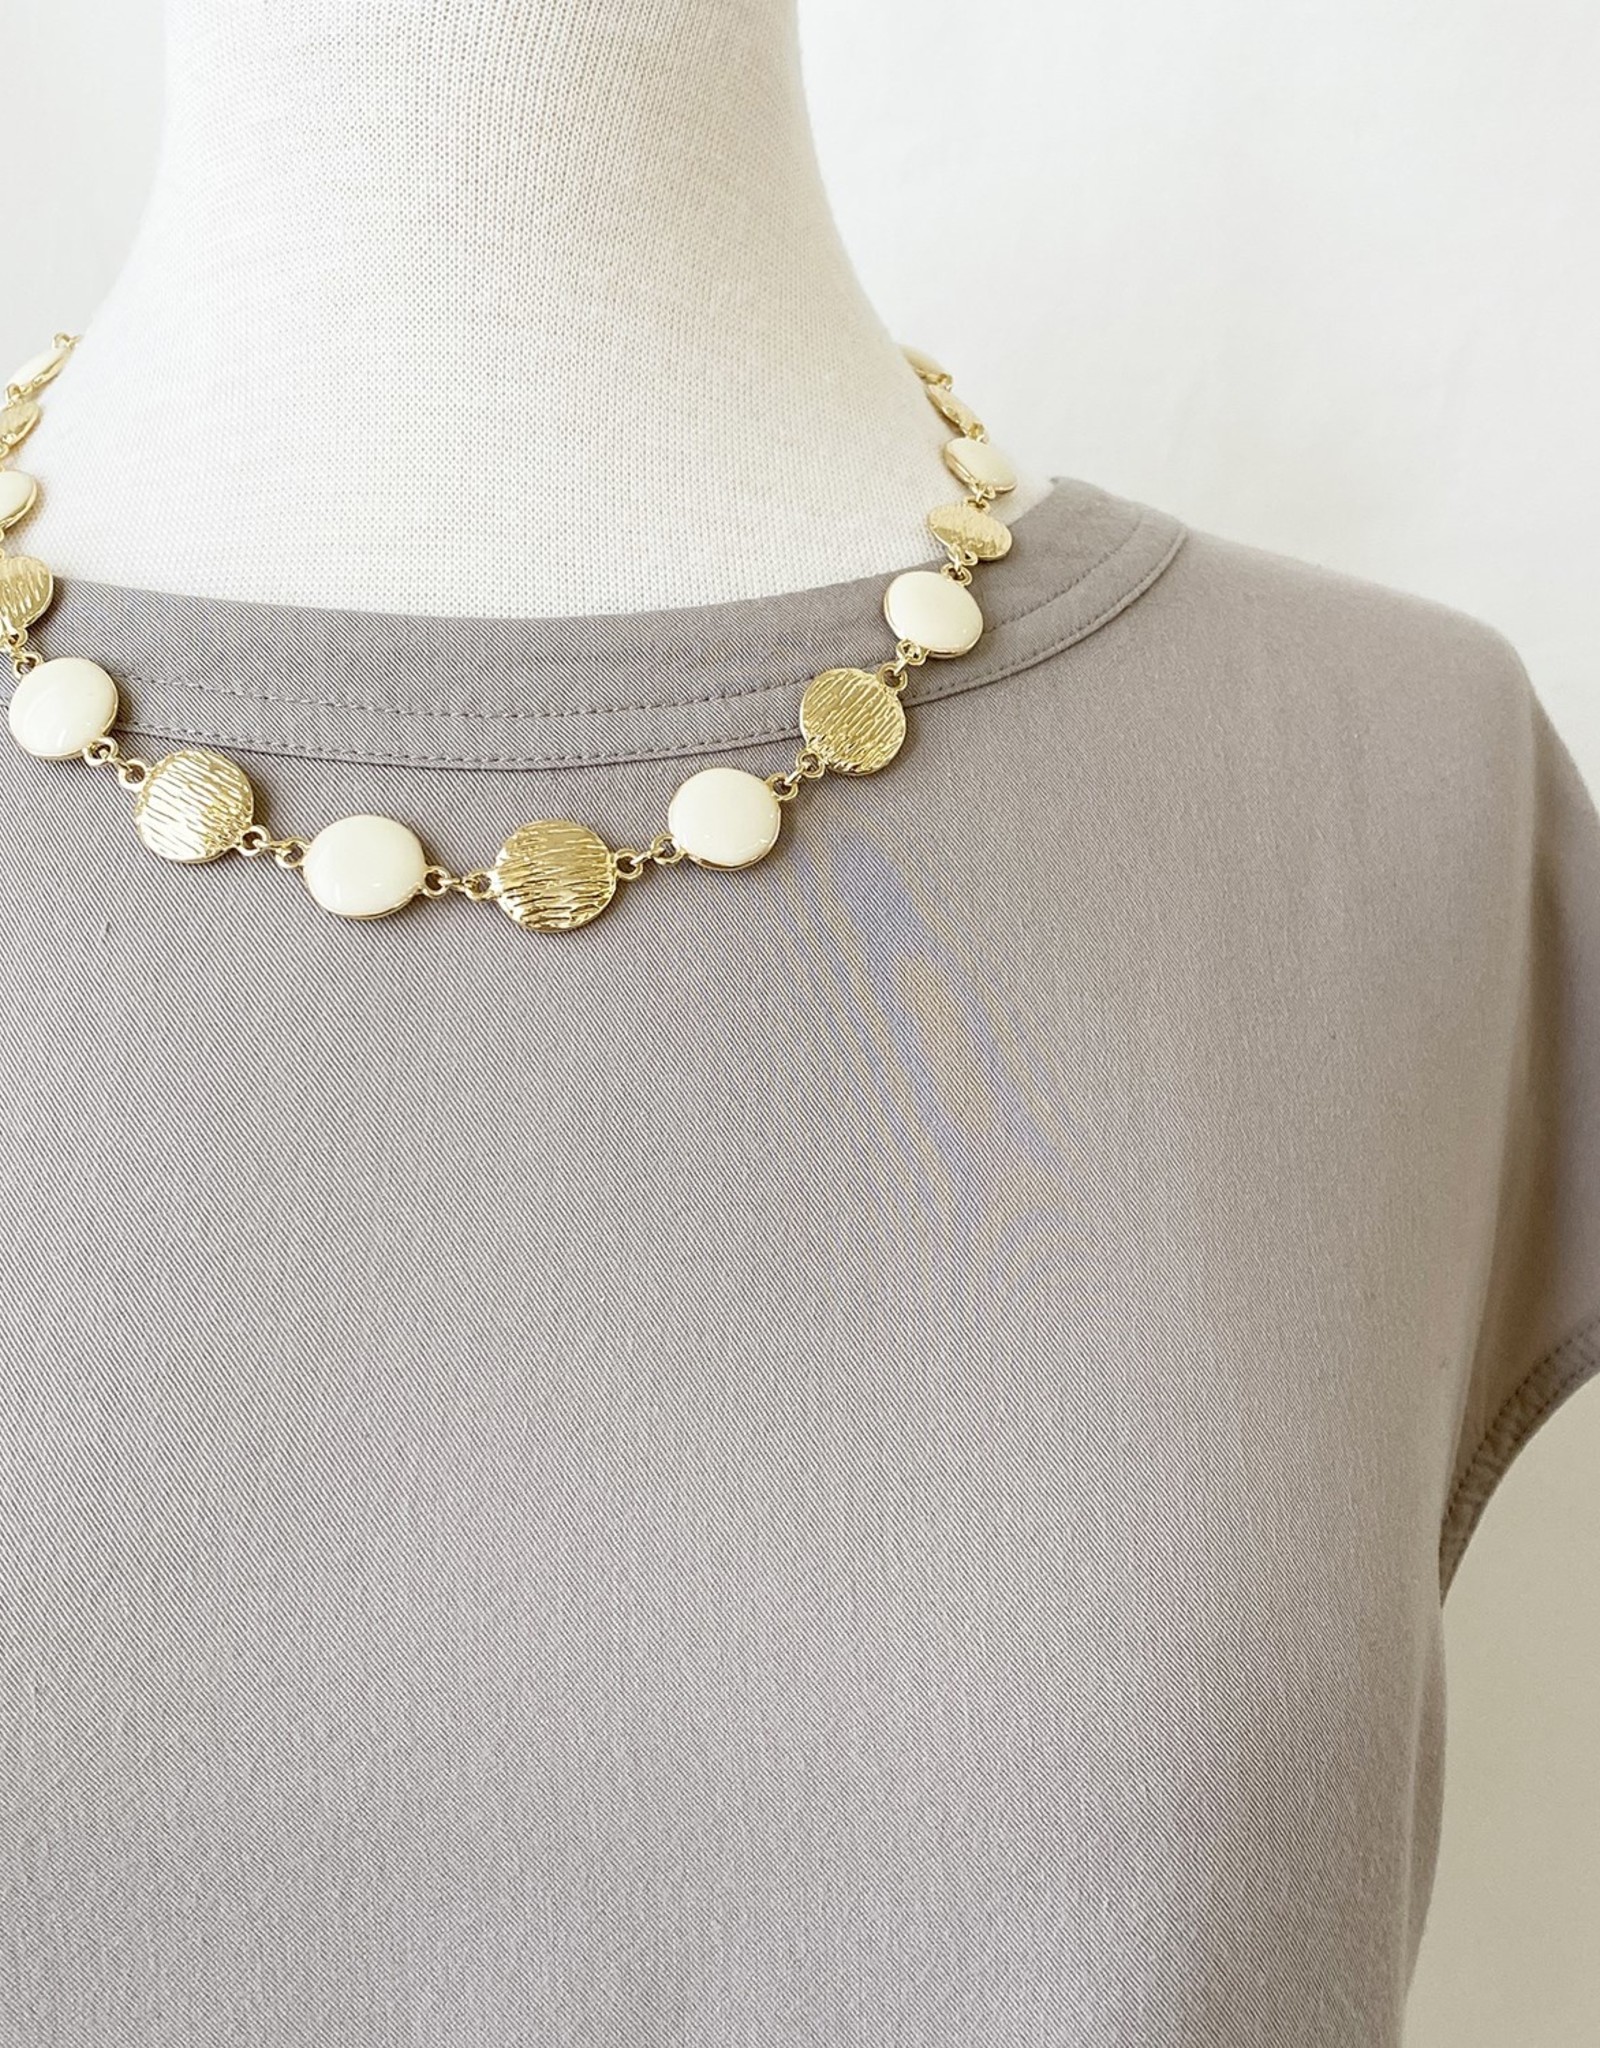 Necklace with Beige & Gold discs